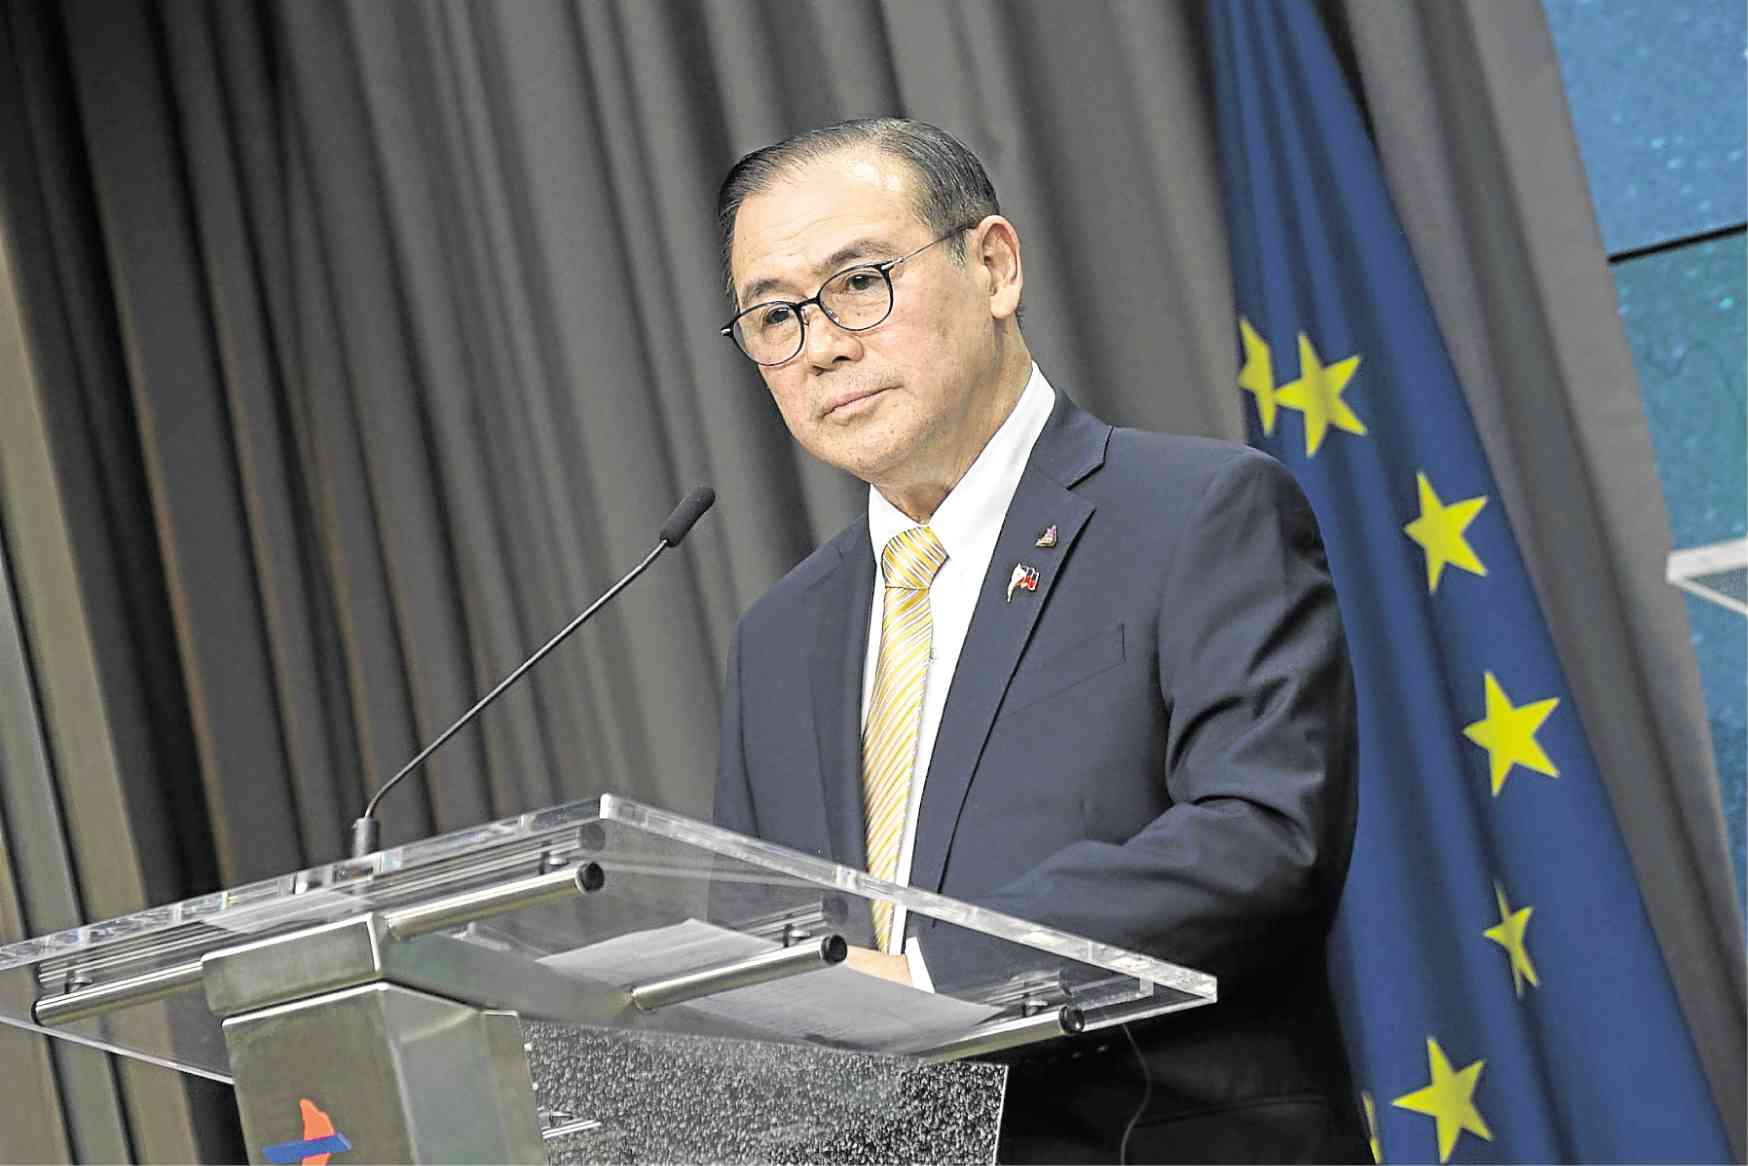 Locsin: DFA to only rely on military intelligence on China’s reported missile tests